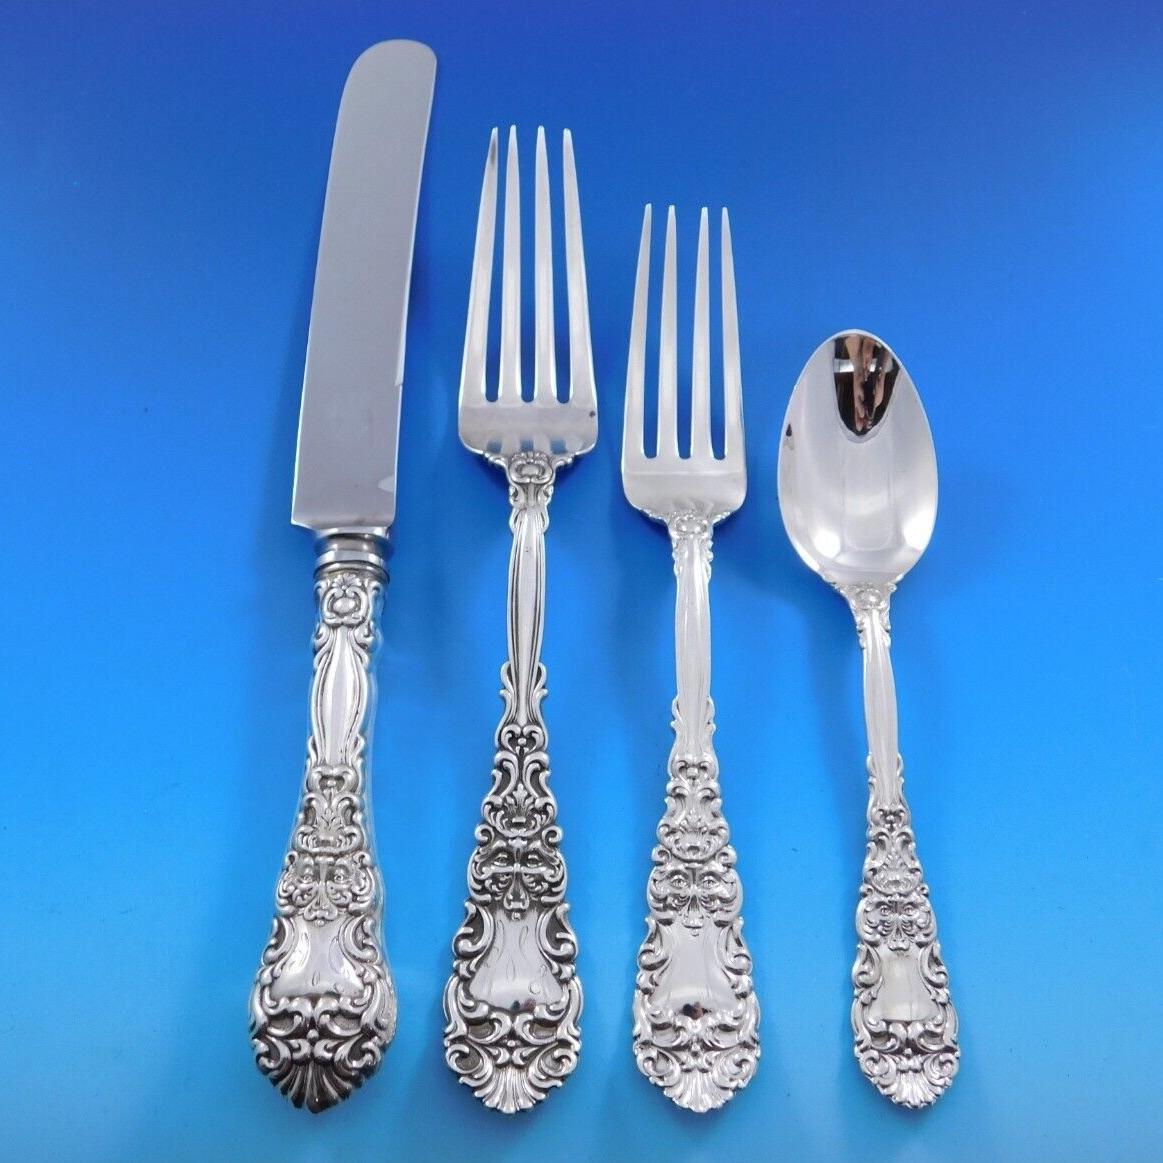 Renaissance by Dominick and Haff Sterling Silver Flatware Set Service 99 pcs Din For Sale 7